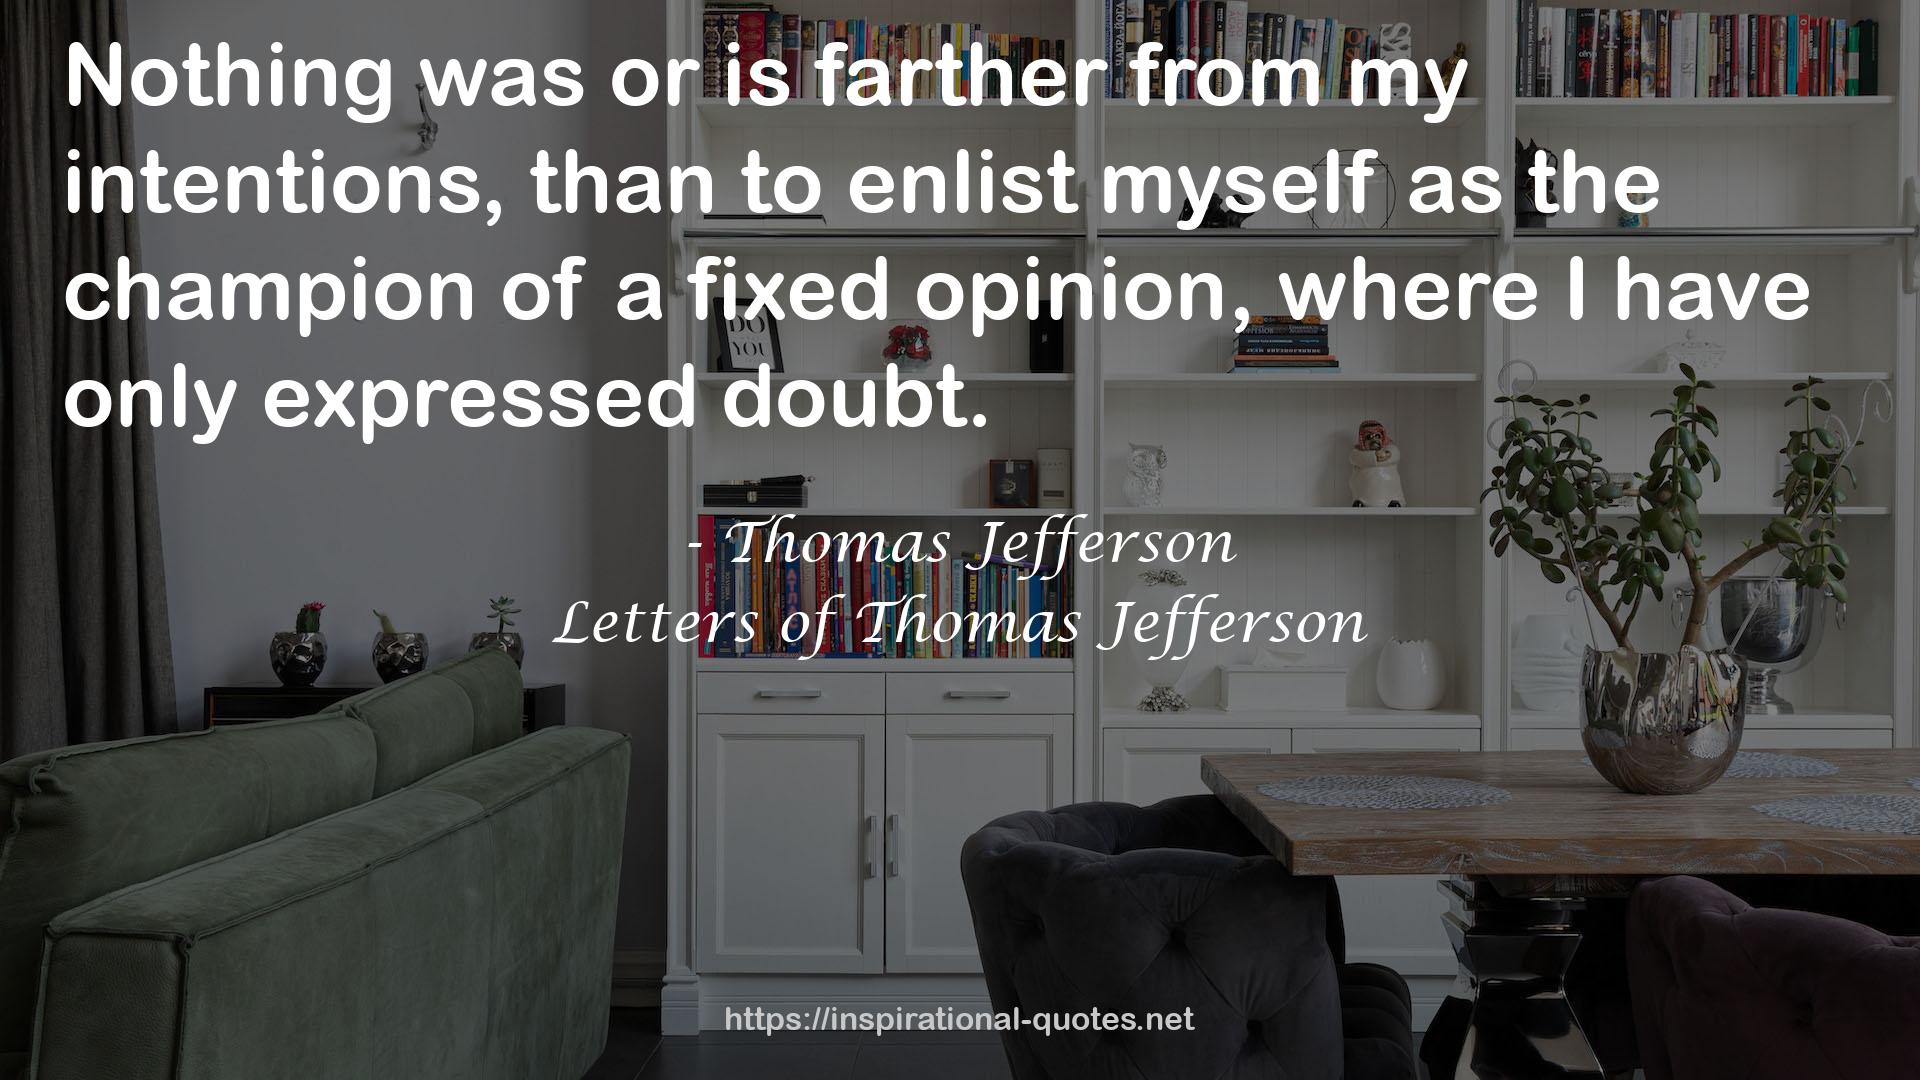 Letters of Thomas Jefferson QUOTES